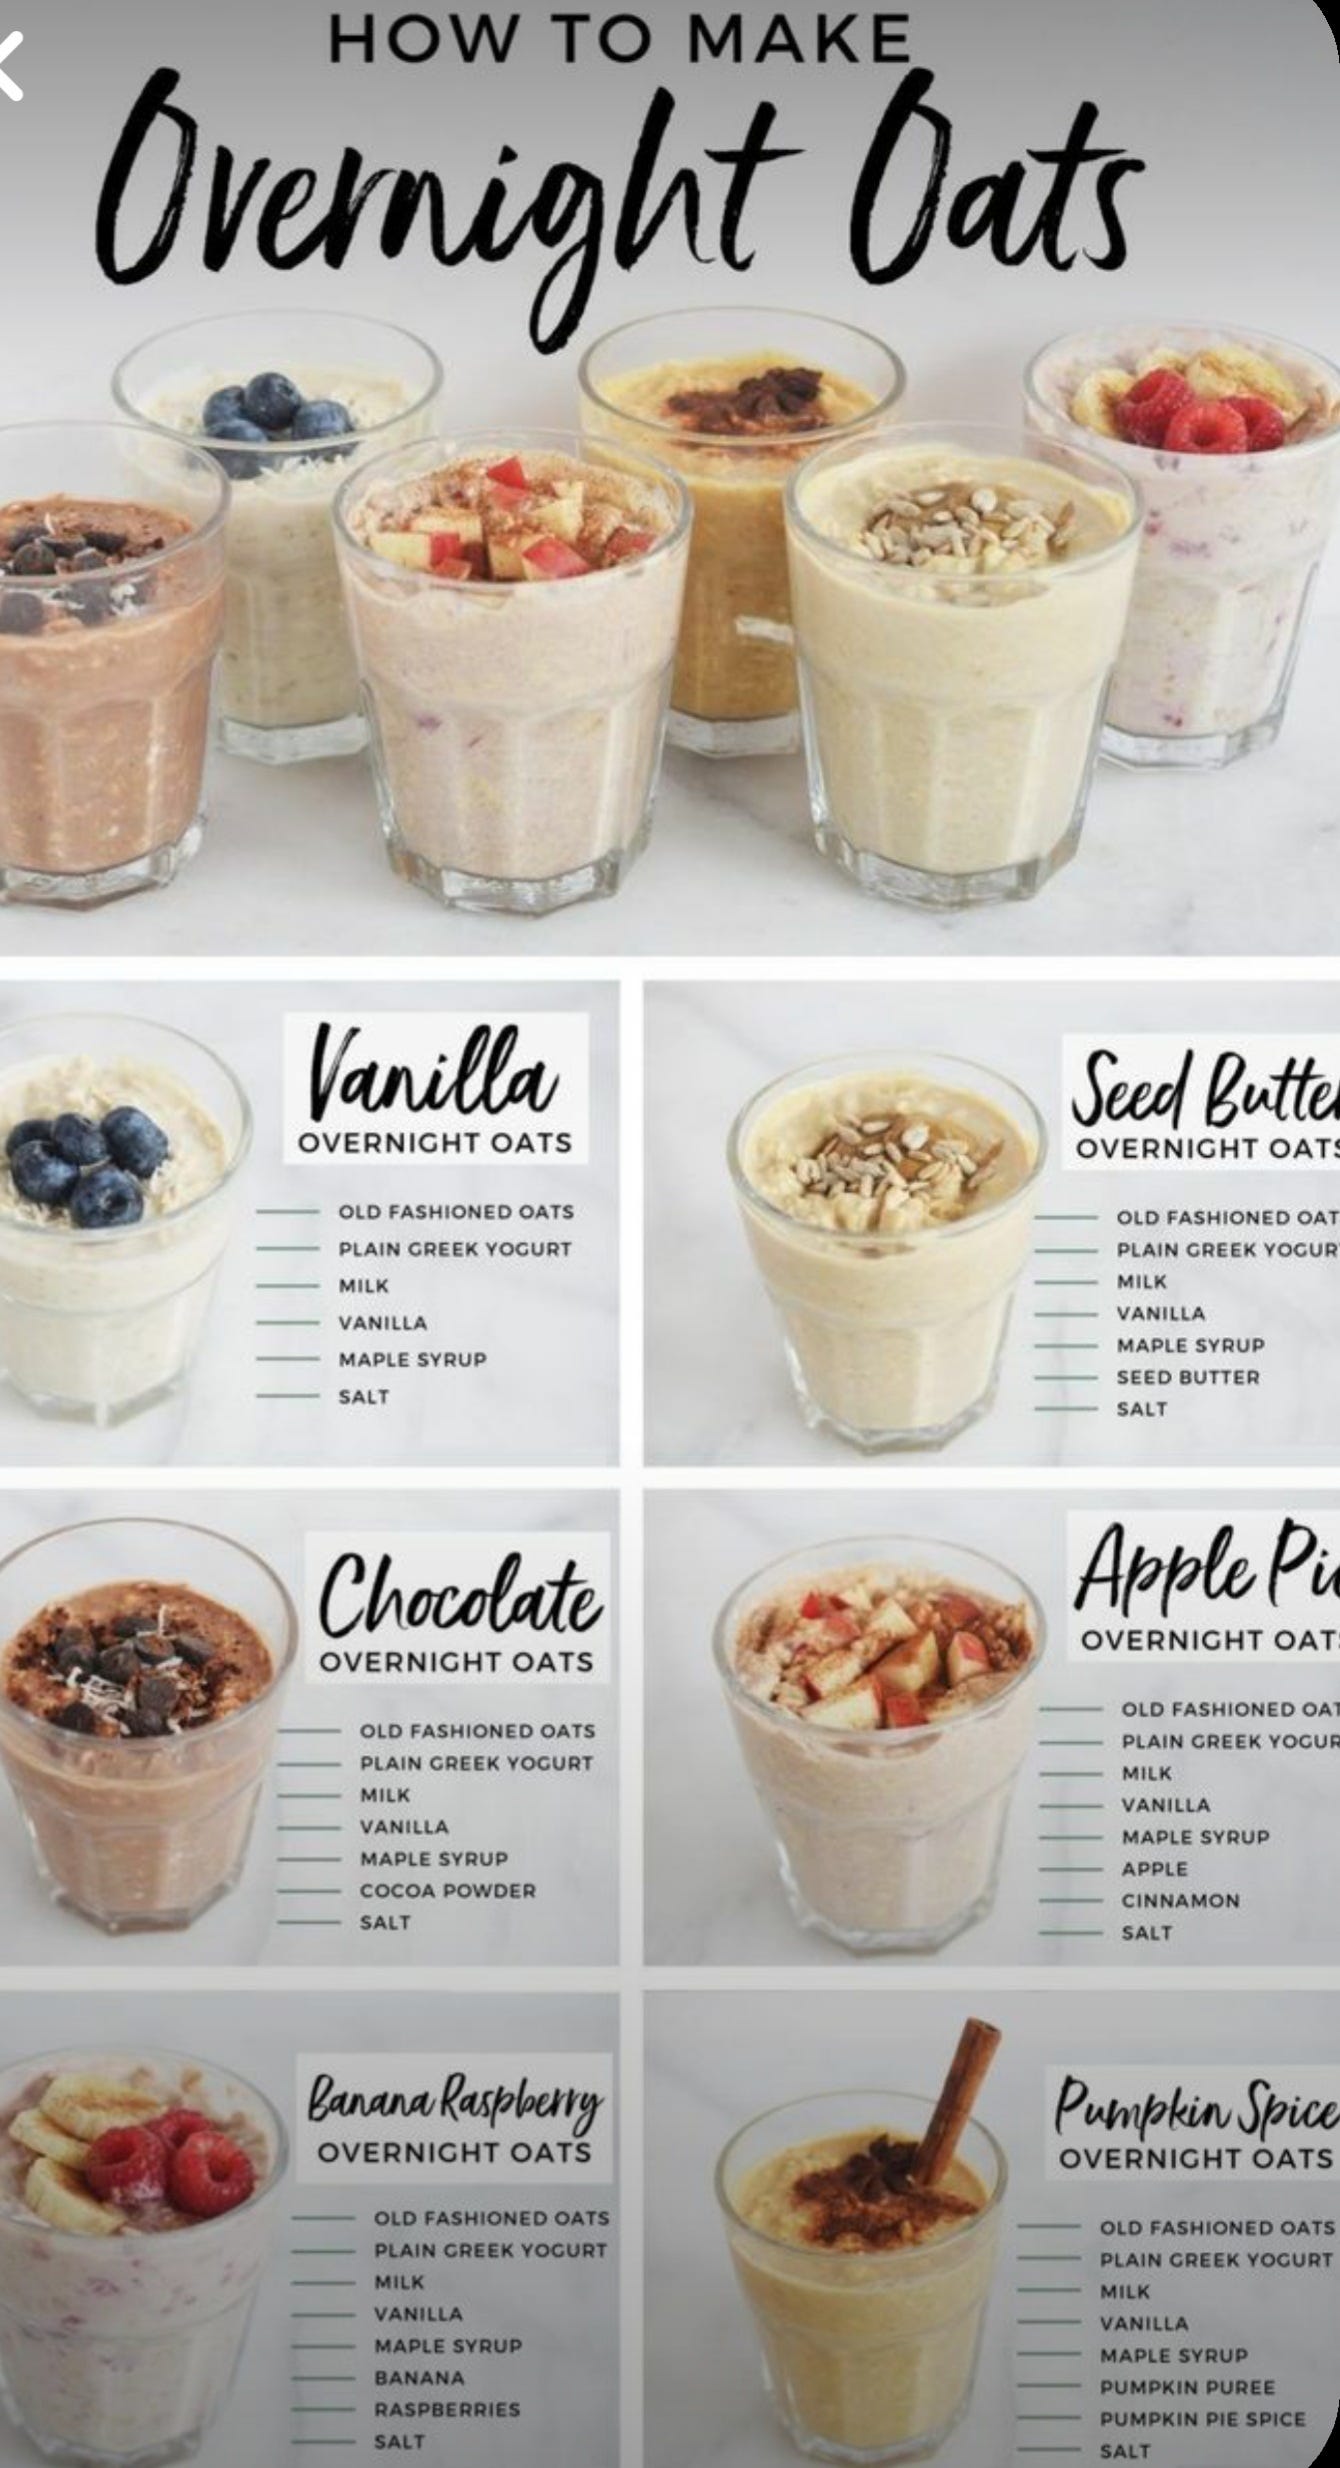 Overnight Oats: Create Your Own Flavor